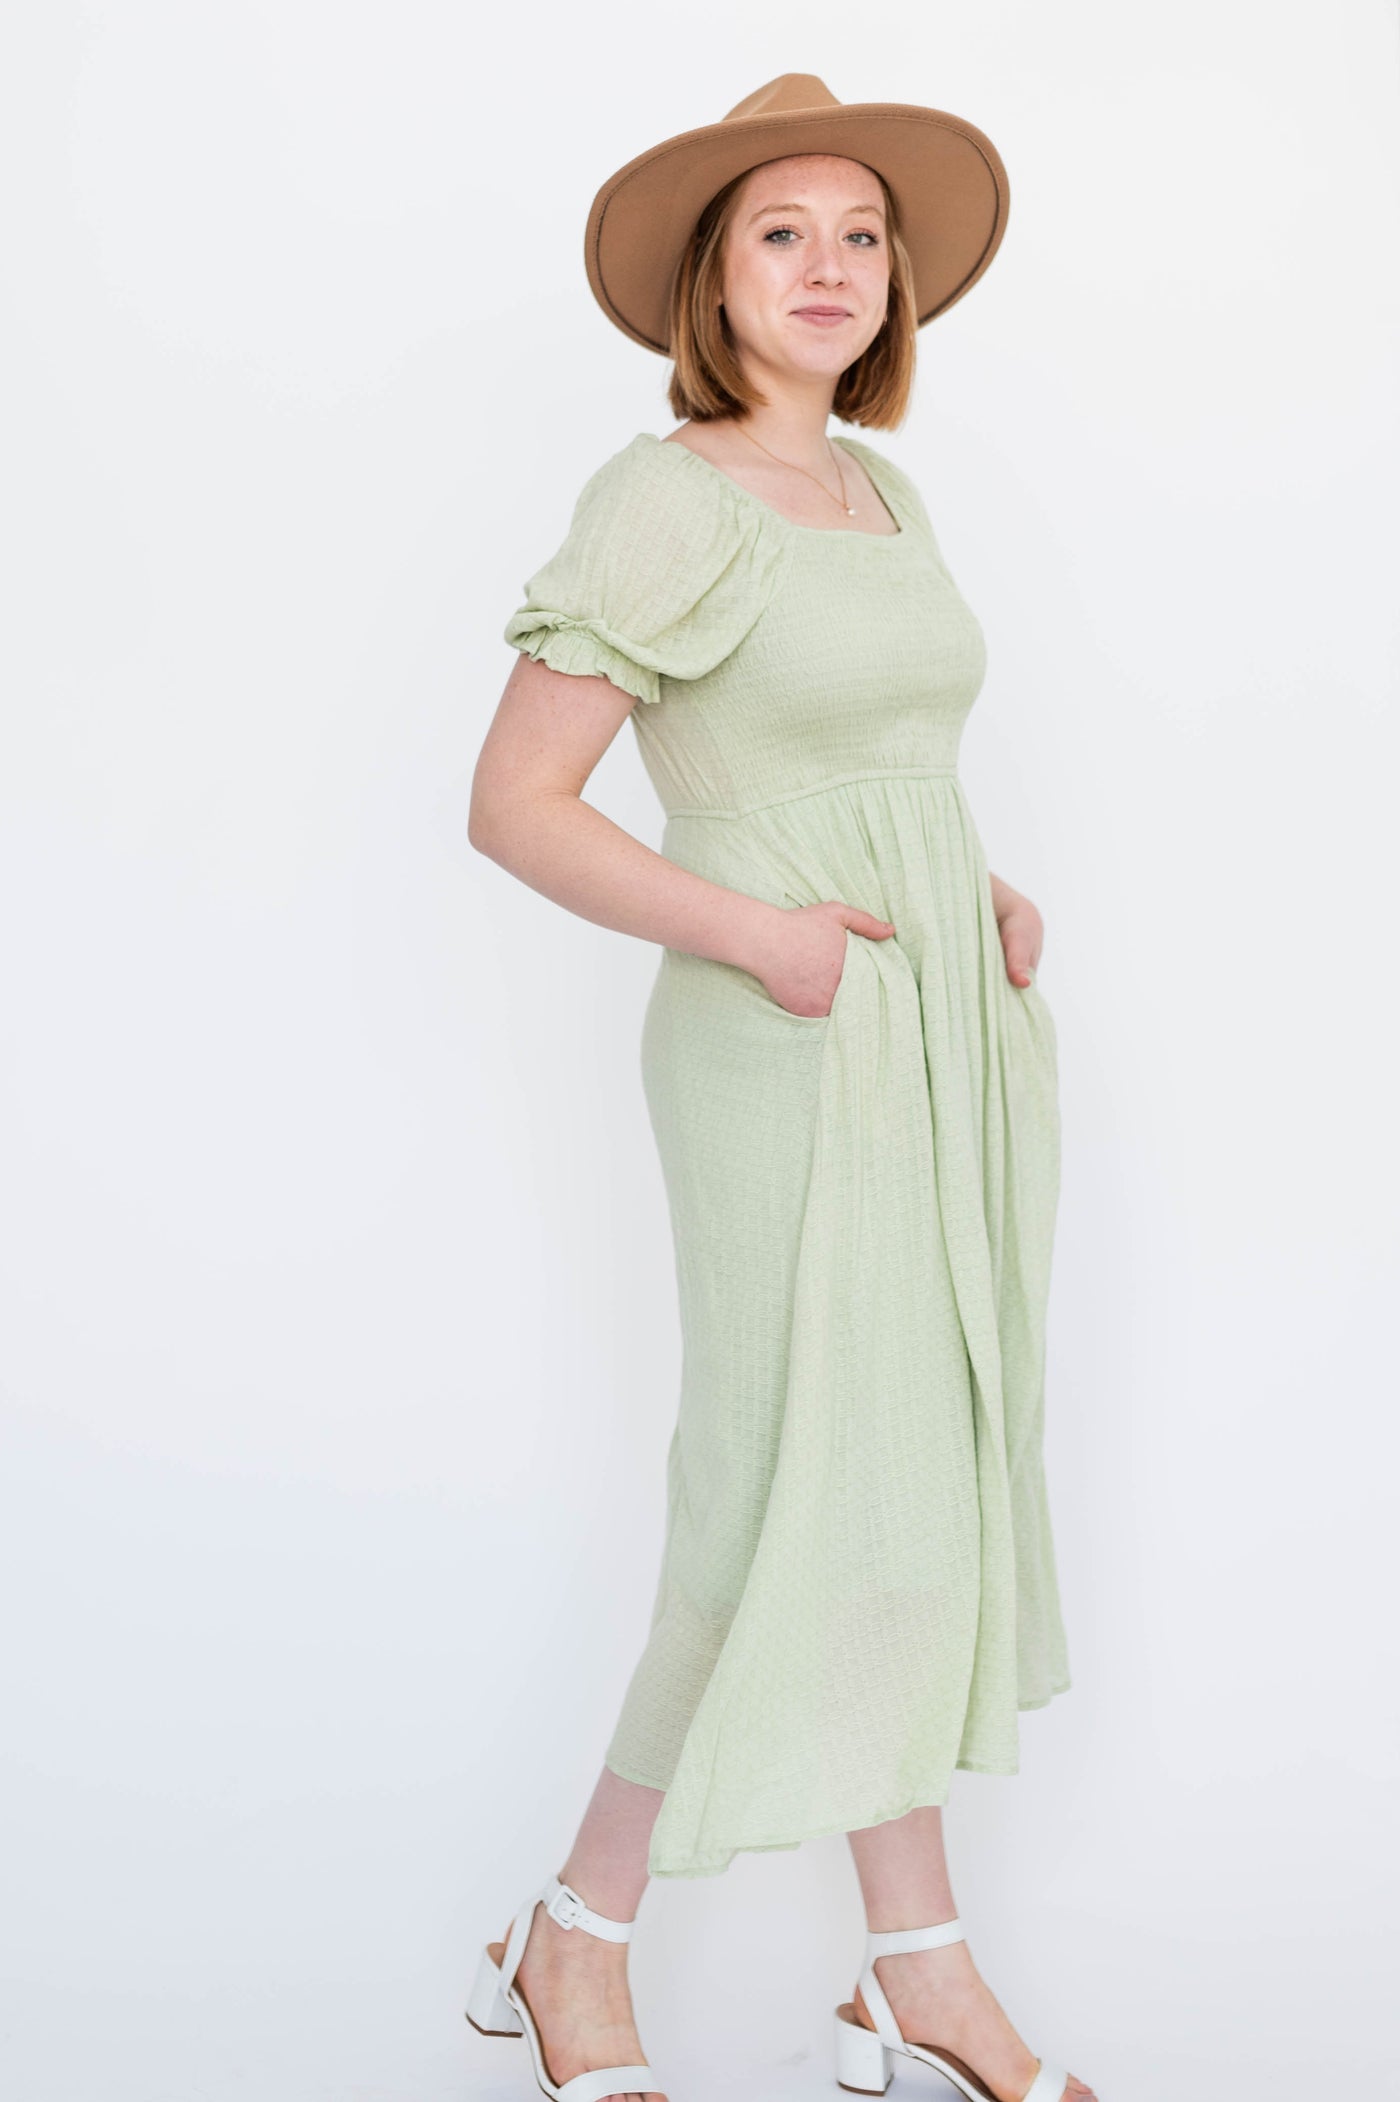 Short sleeve sage dress with smocked bodice and pockets